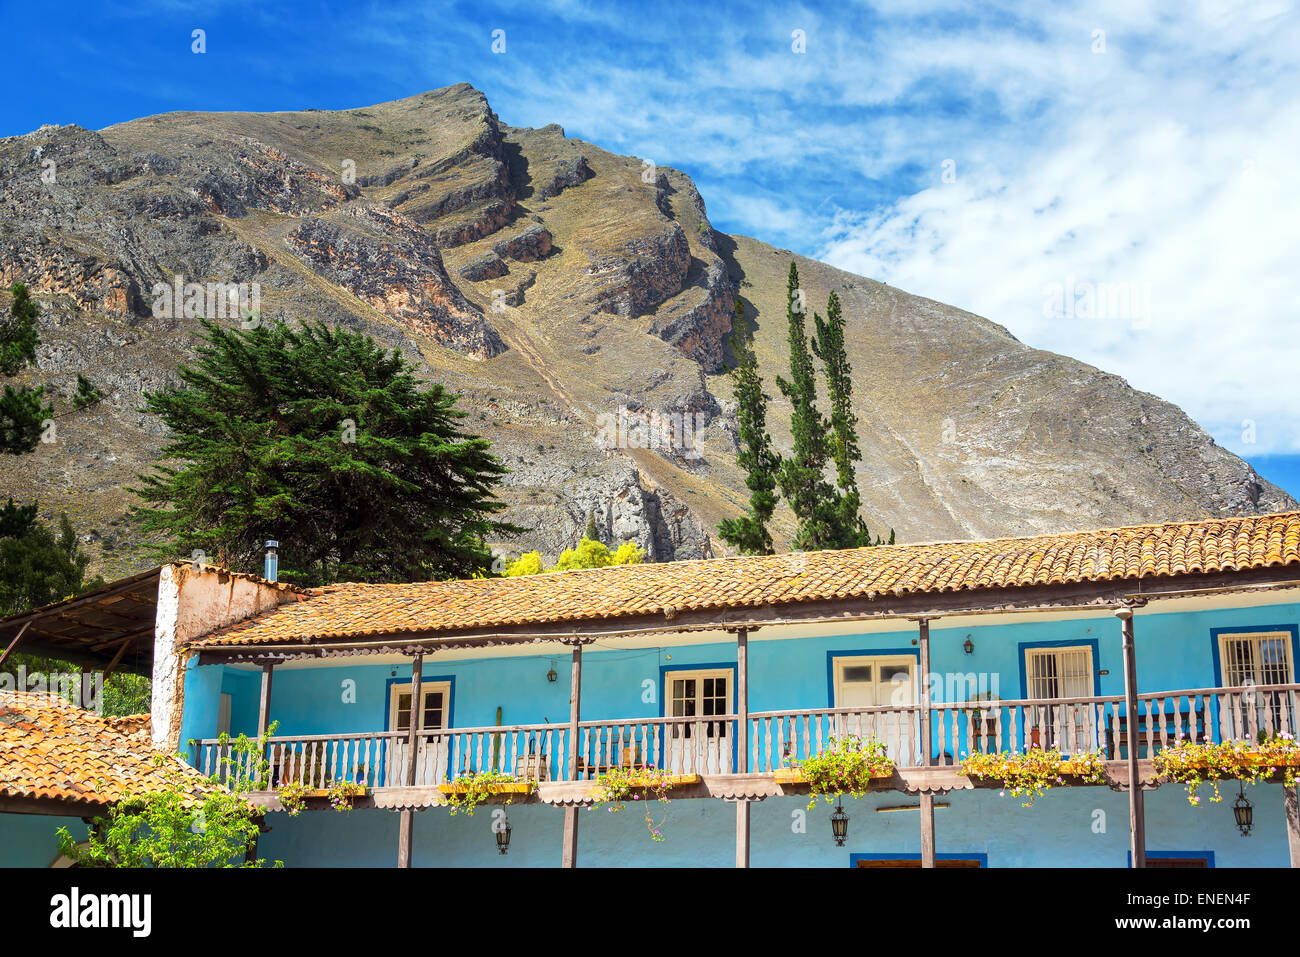 Old colonial building with hills rising high above in Tarma, Peru Stock Photo